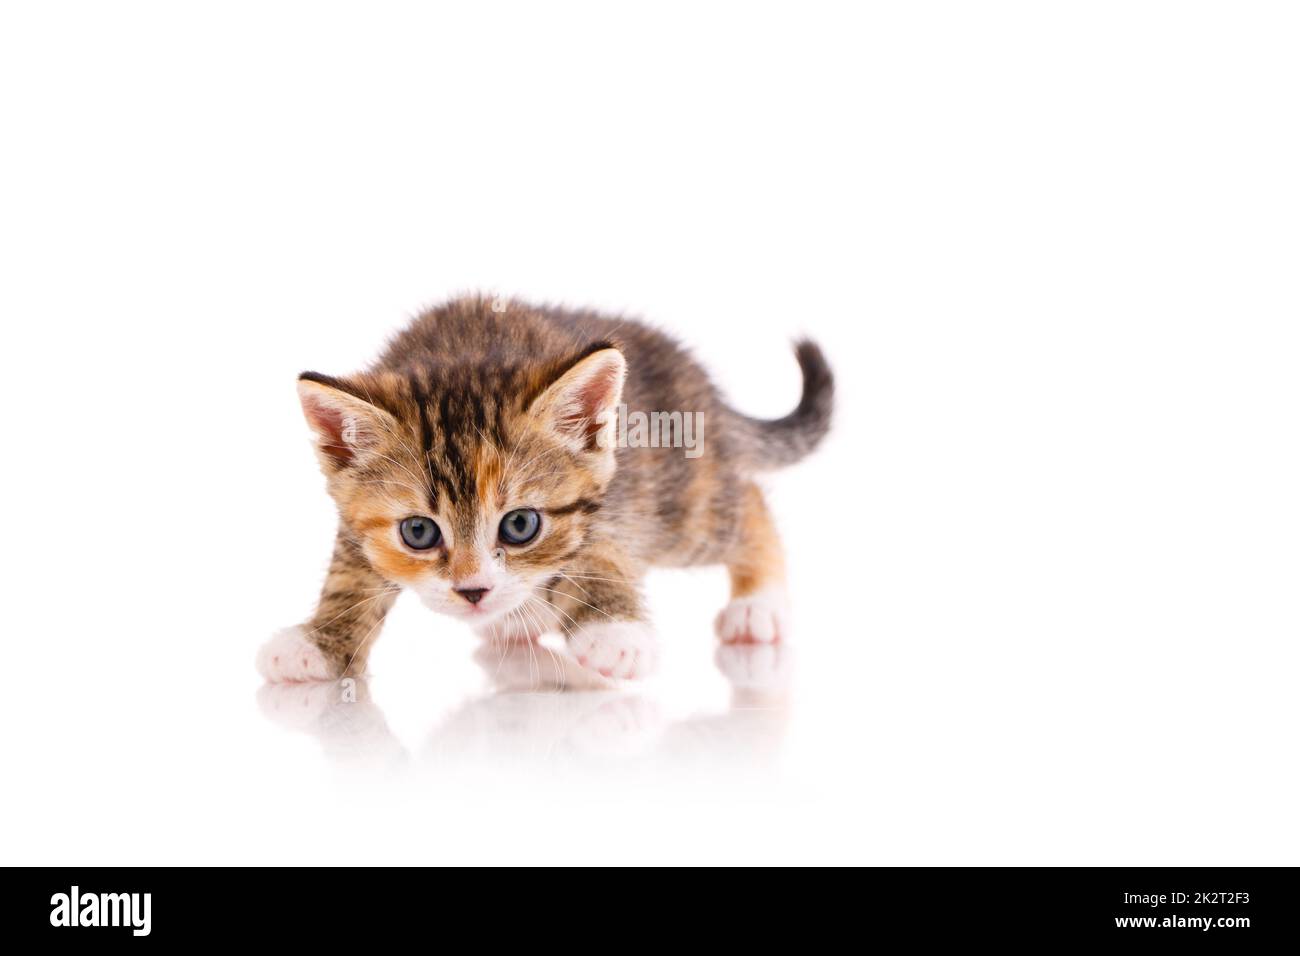 Kitten with blue eyes is playing and wants to attack the camera. Stock Photo